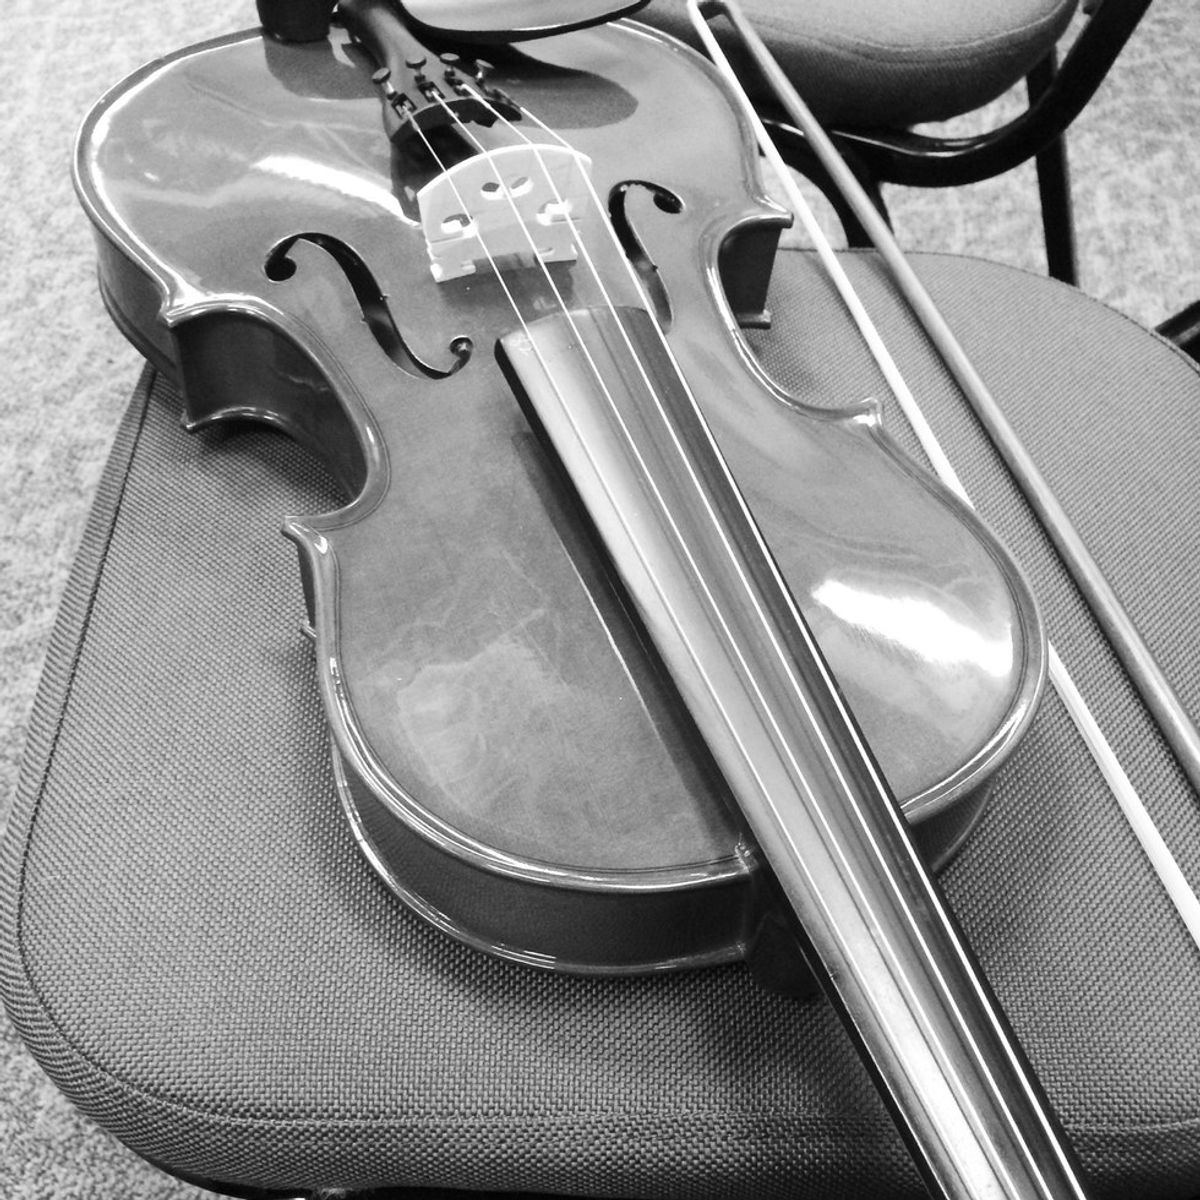 13 Things All Violists Know To Be True